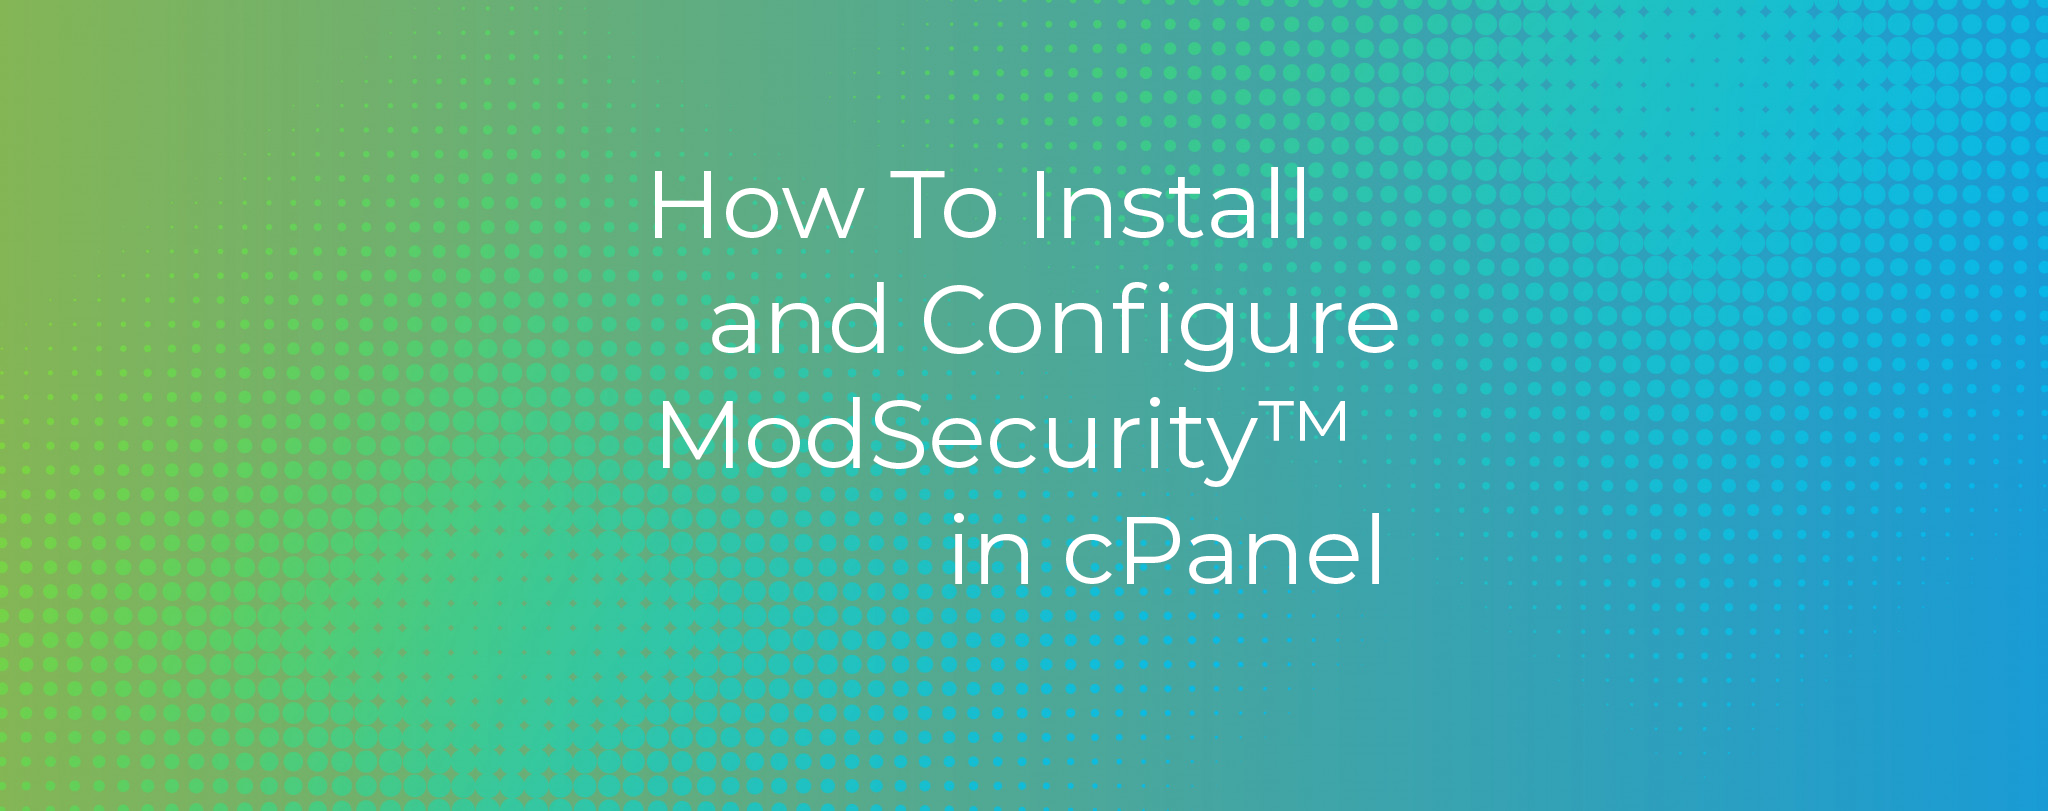 How-To-Install-and-Configure-ModSecurity-in-cPanel.png